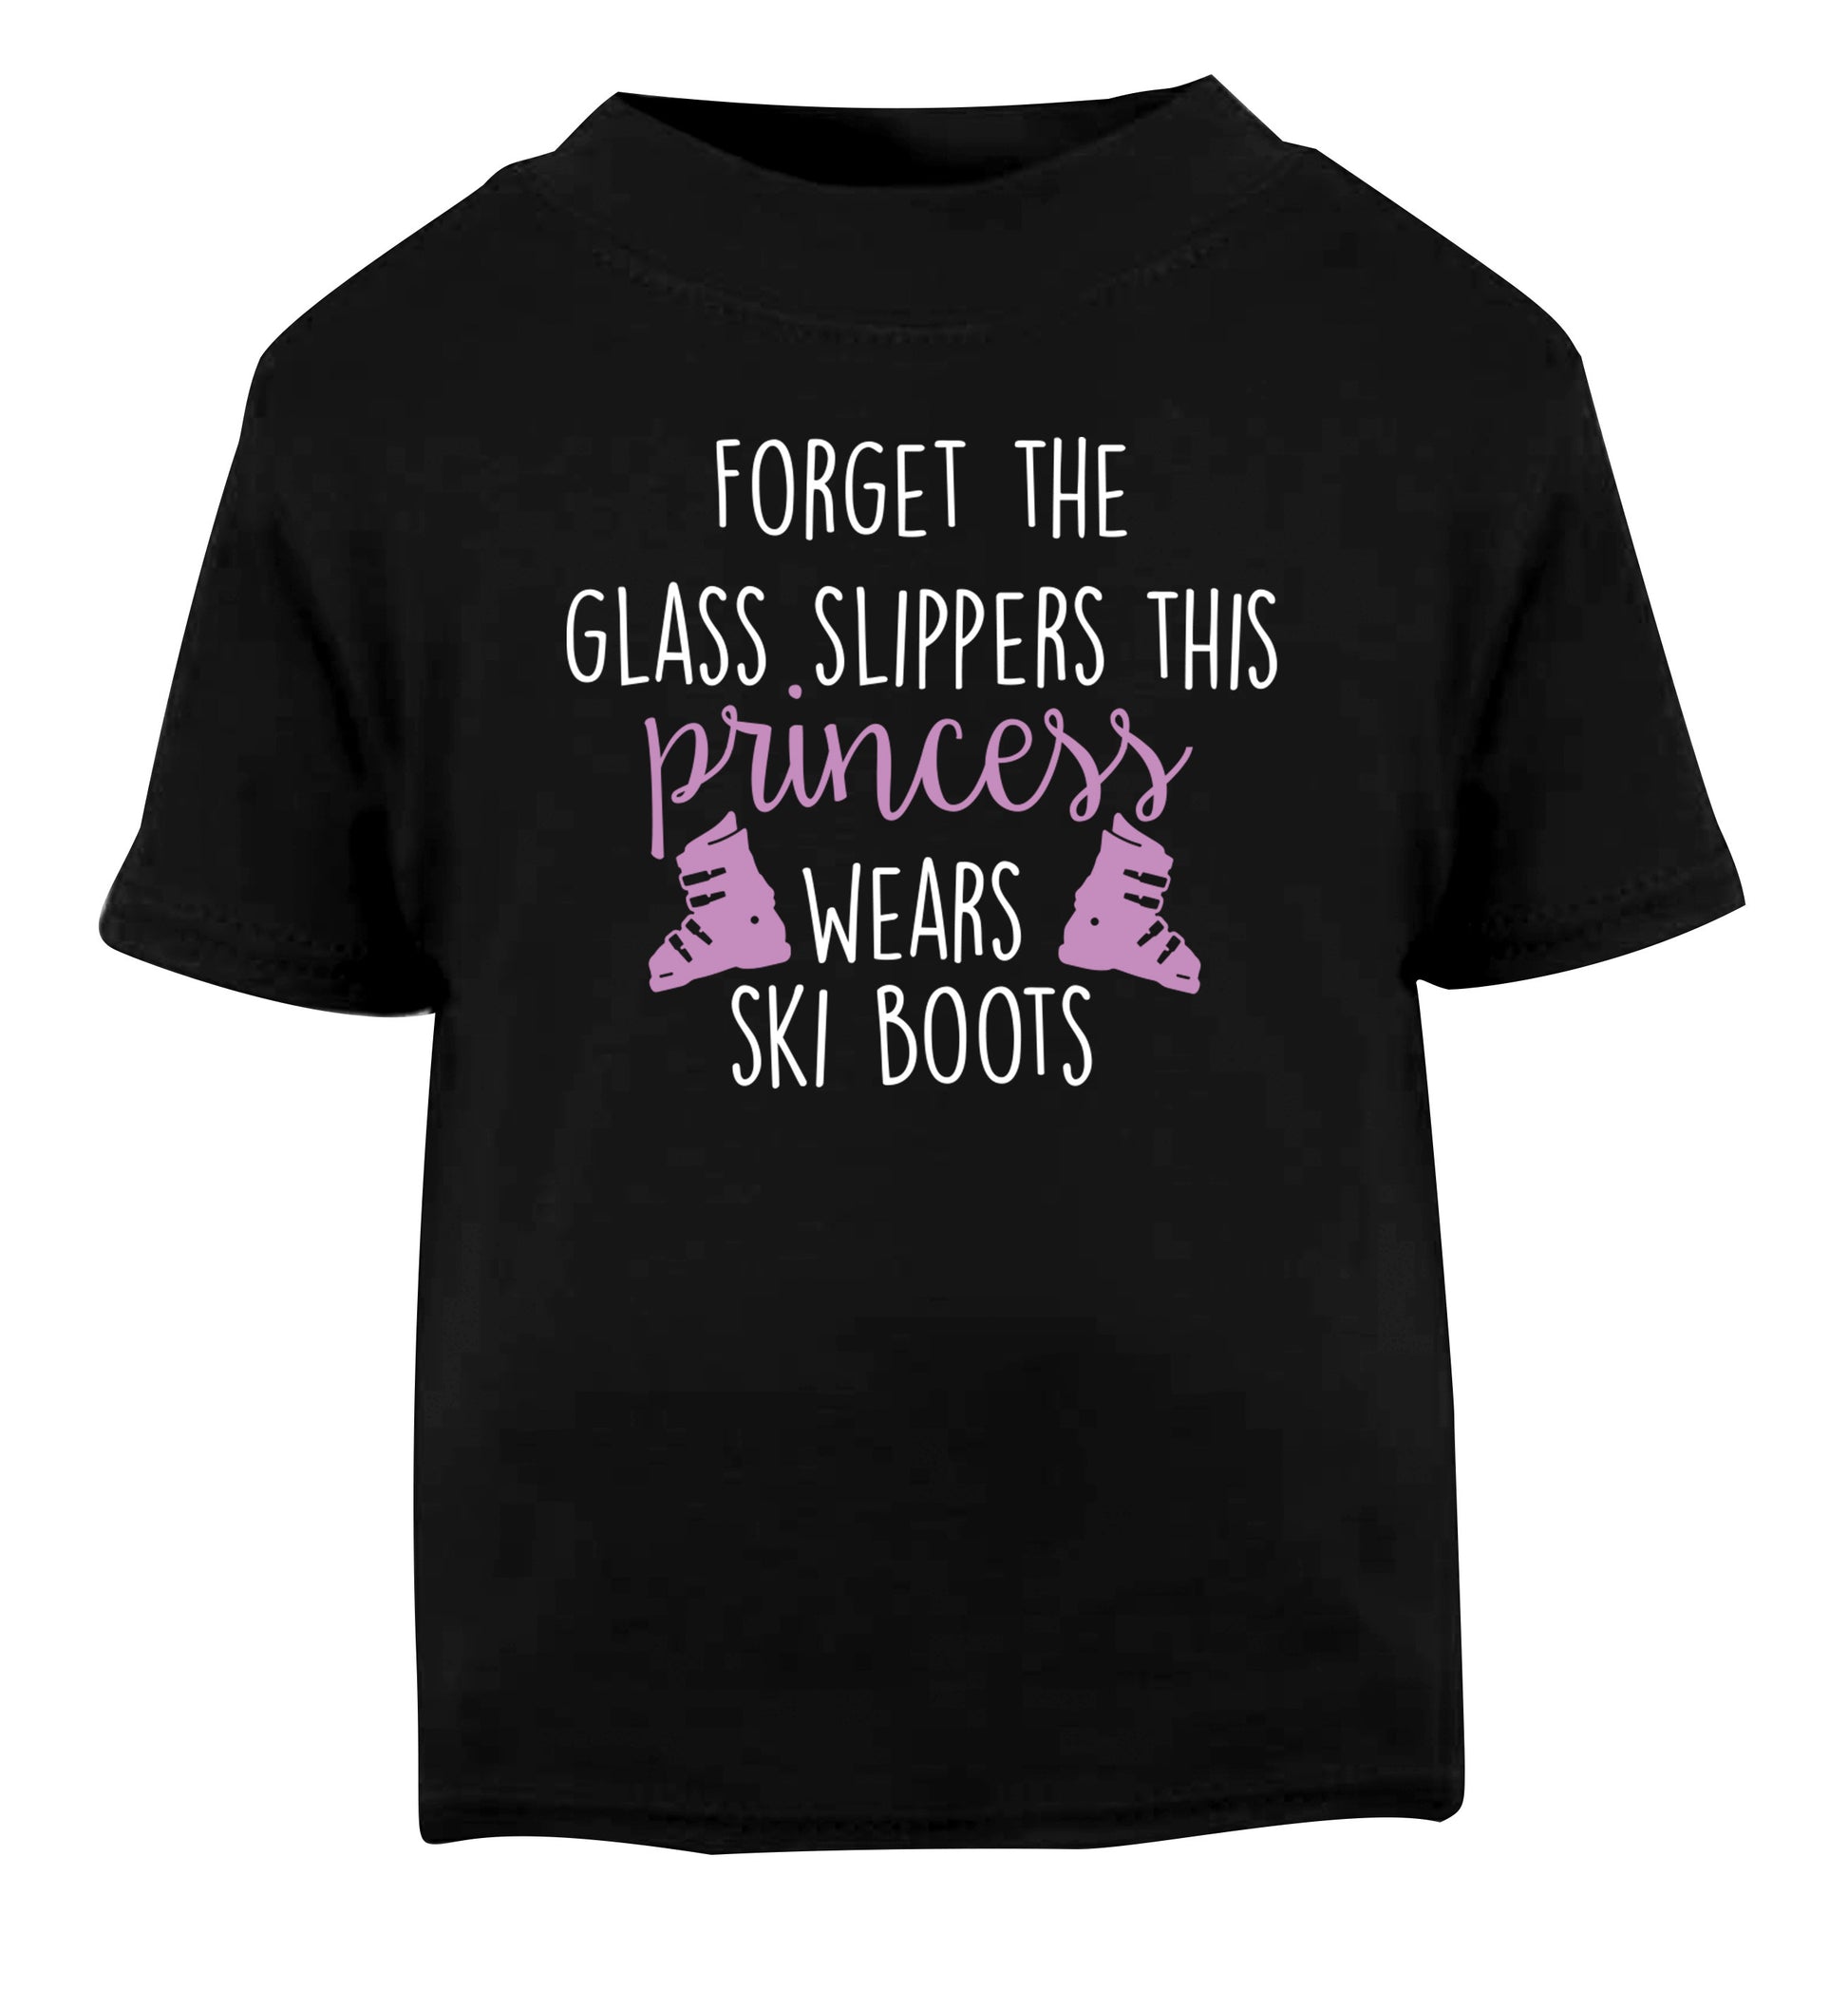 Forget the glass slippers this princess wears ski boots Black Baby Toddler Tshirt 2 years